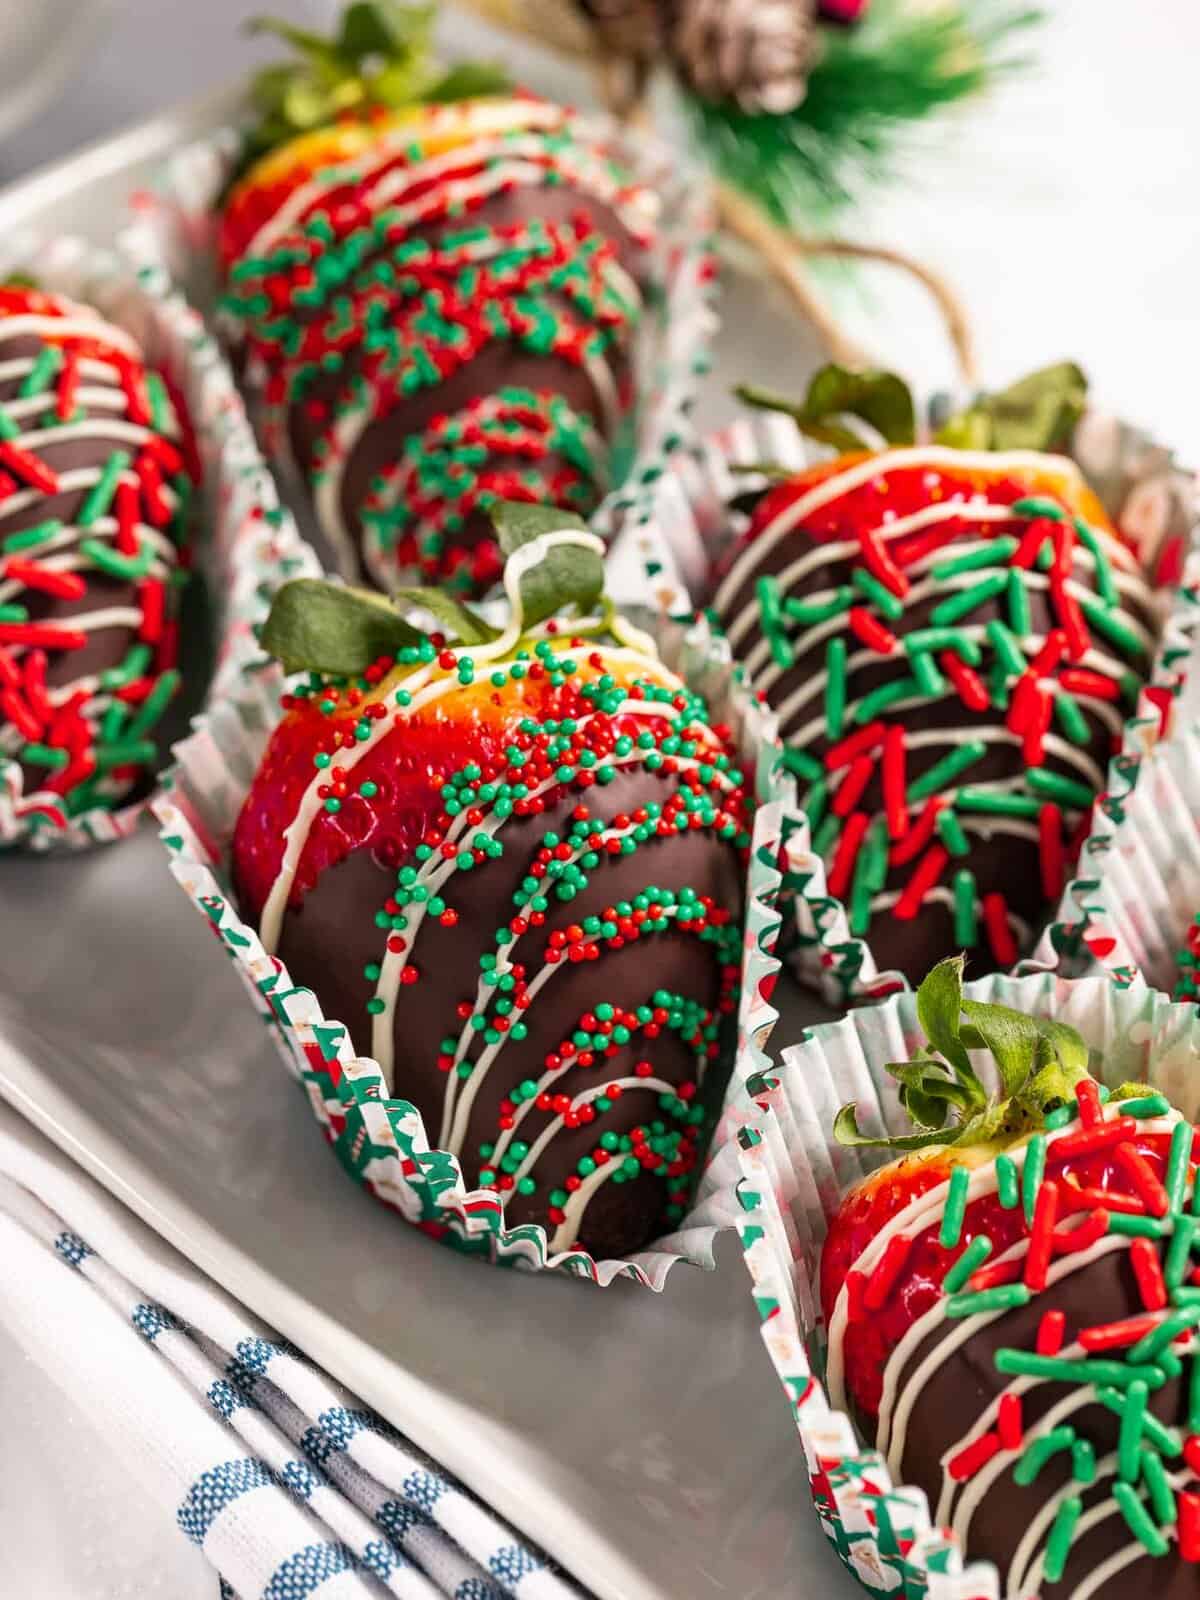 Christmas chocolate-covered strawberries with festive red and green sprinkles.